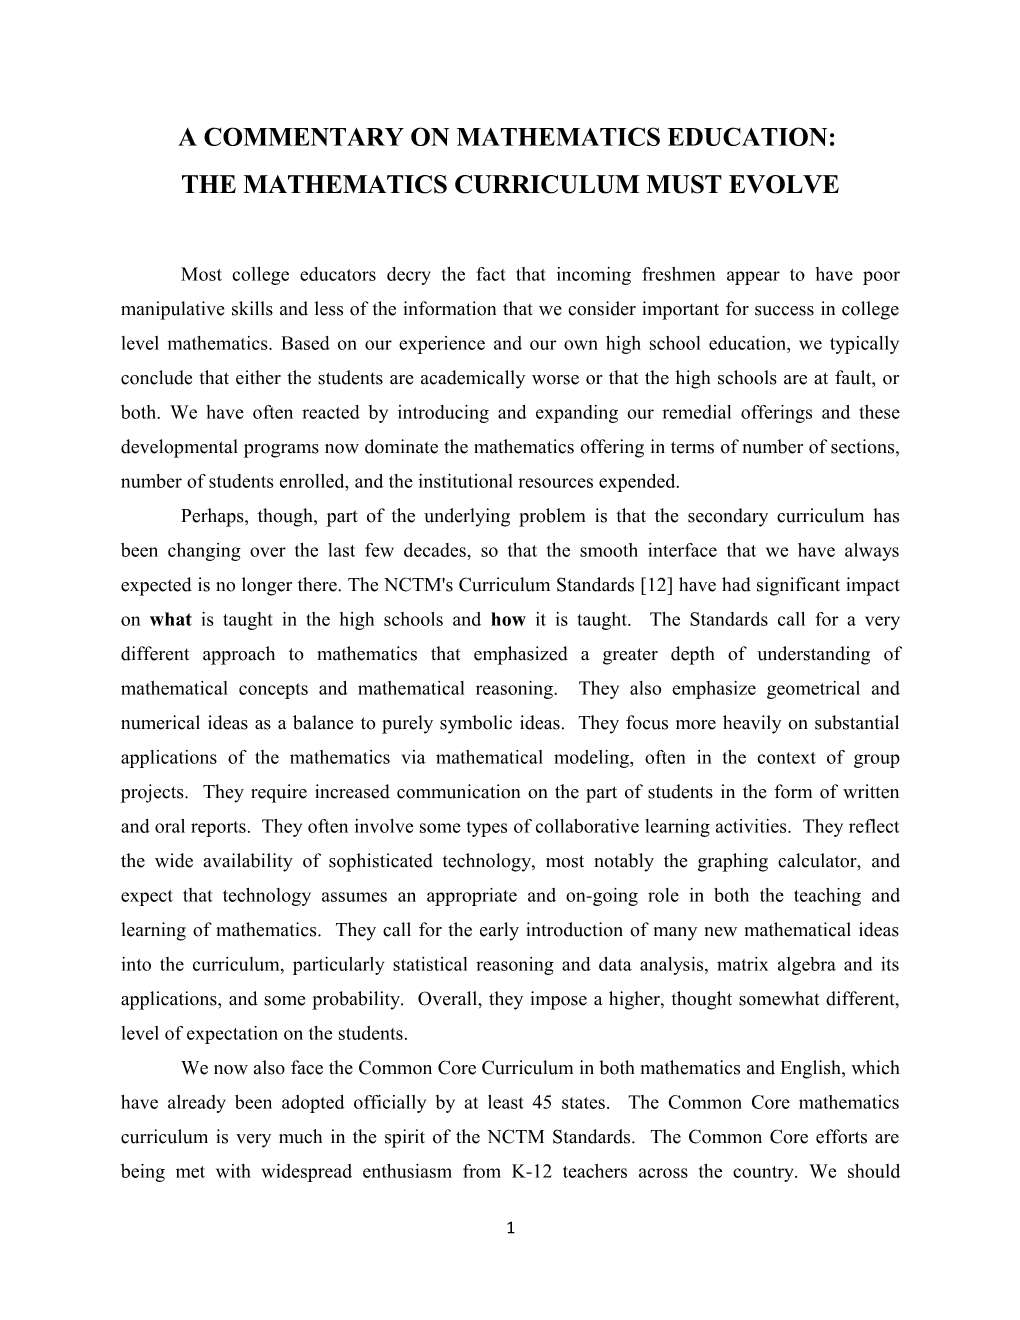 A Commentary on Mathematics Education